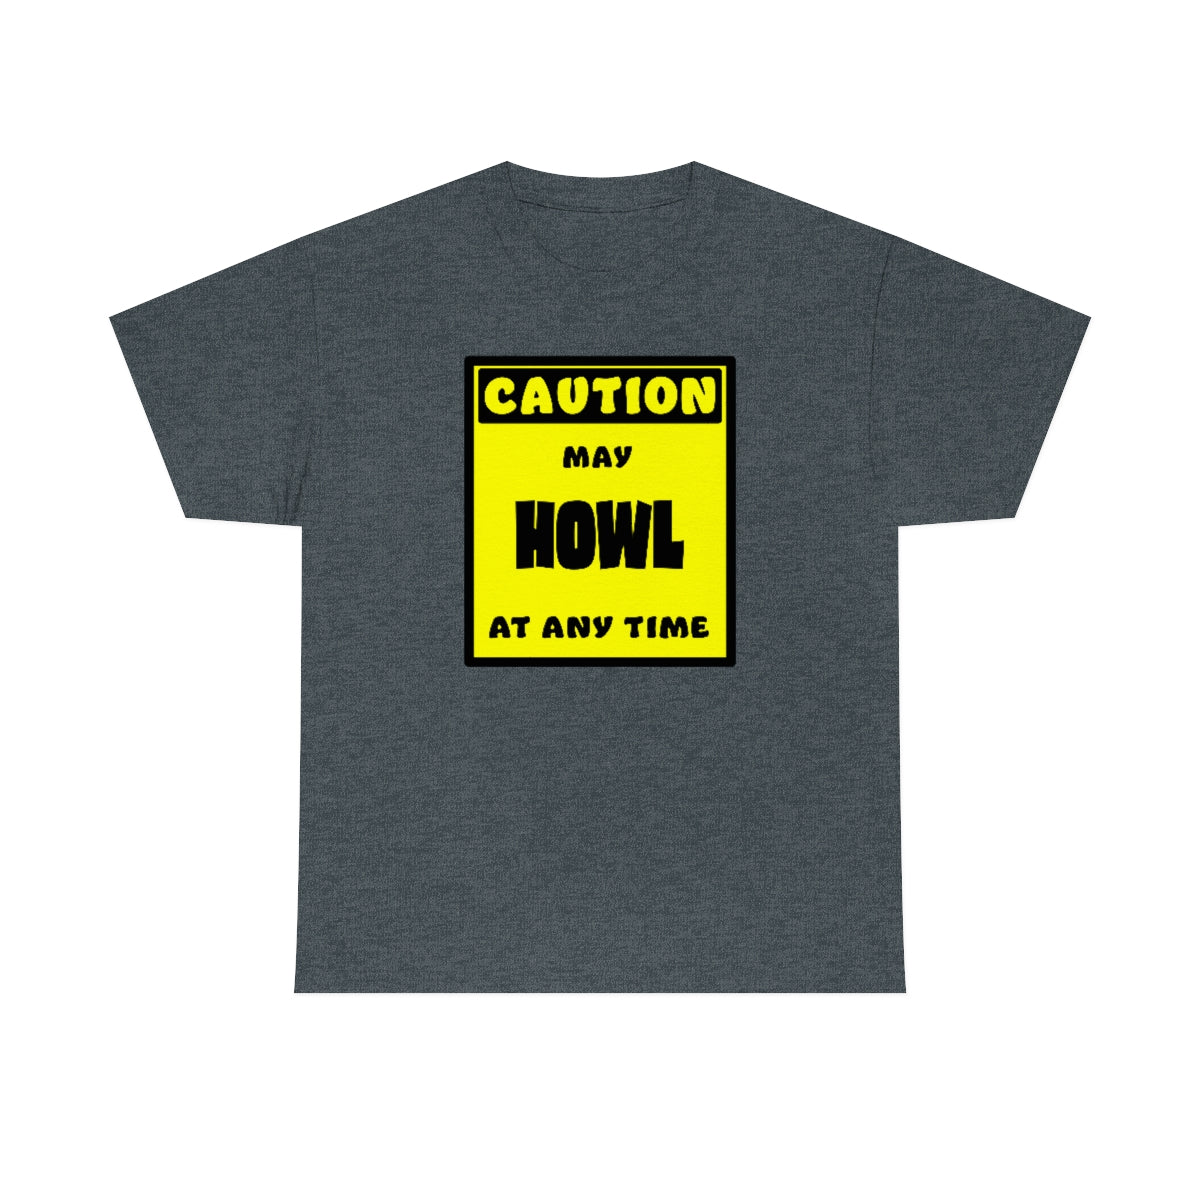 CAUTION! May HOWL at any time! - T-Shirt T-Shirt AFLT-Whootorca Dark Heather S 